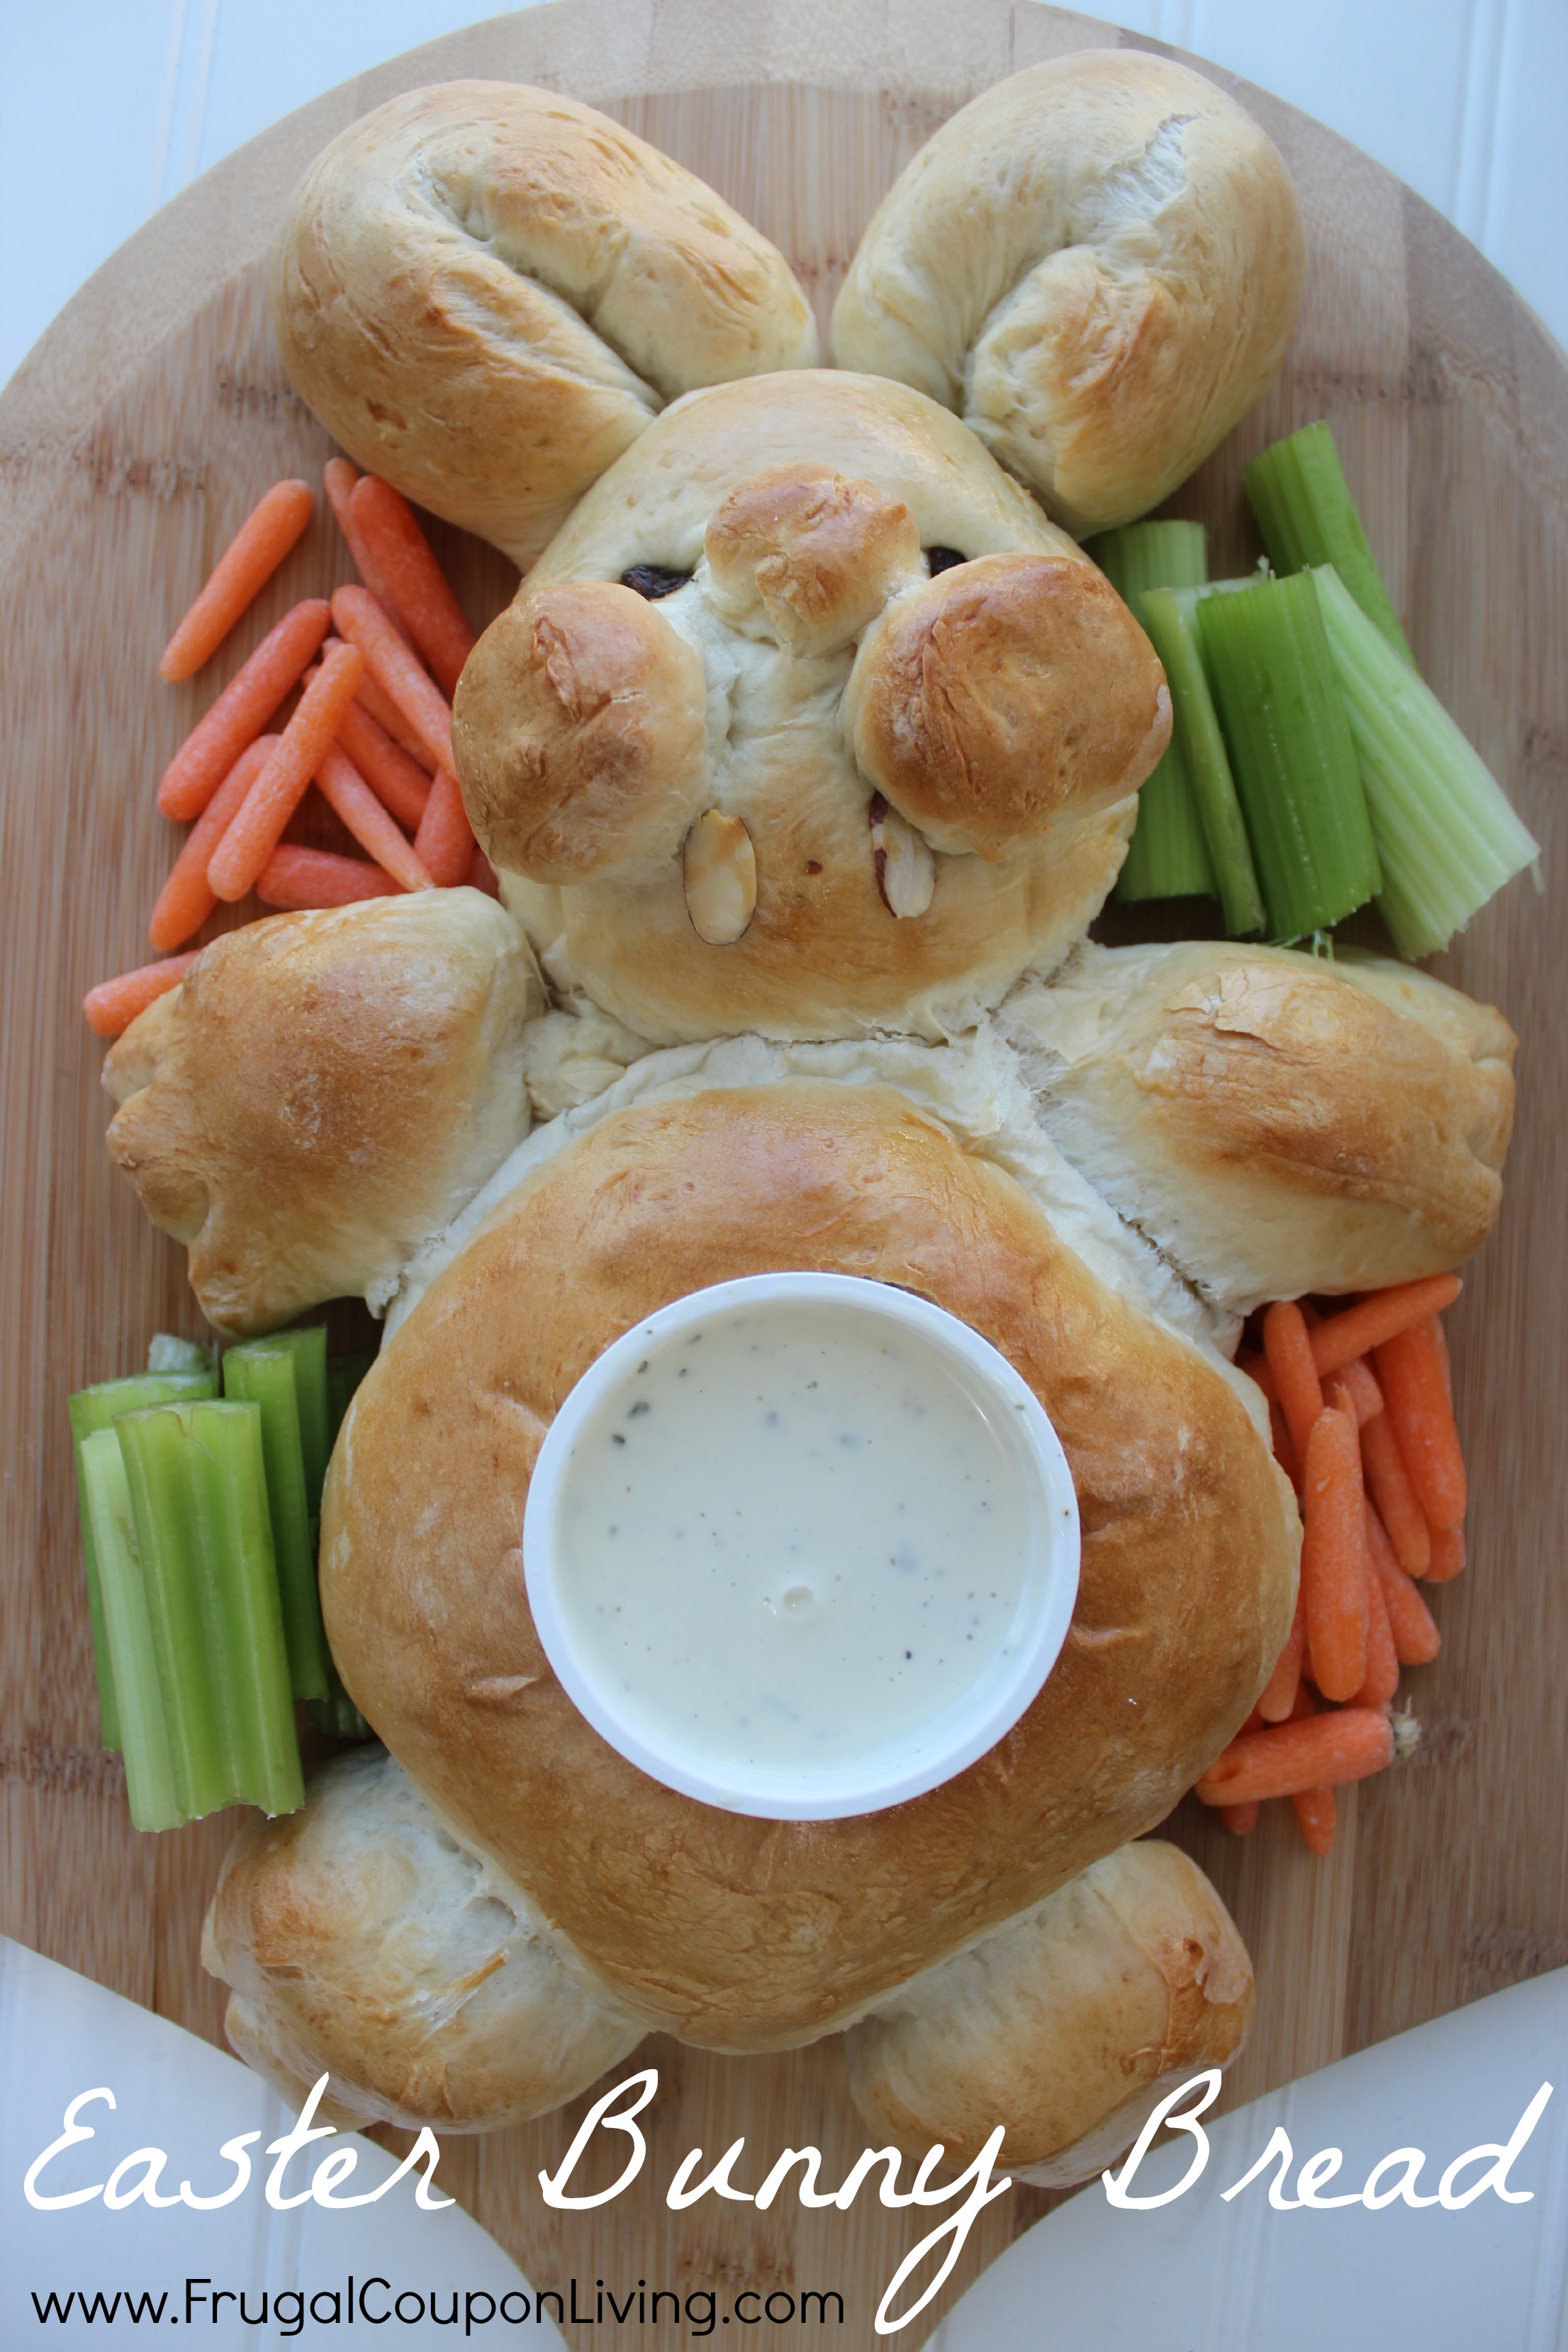 Easter Bunny Bread Recipe and Tutorial - Veggie Tray for Spring